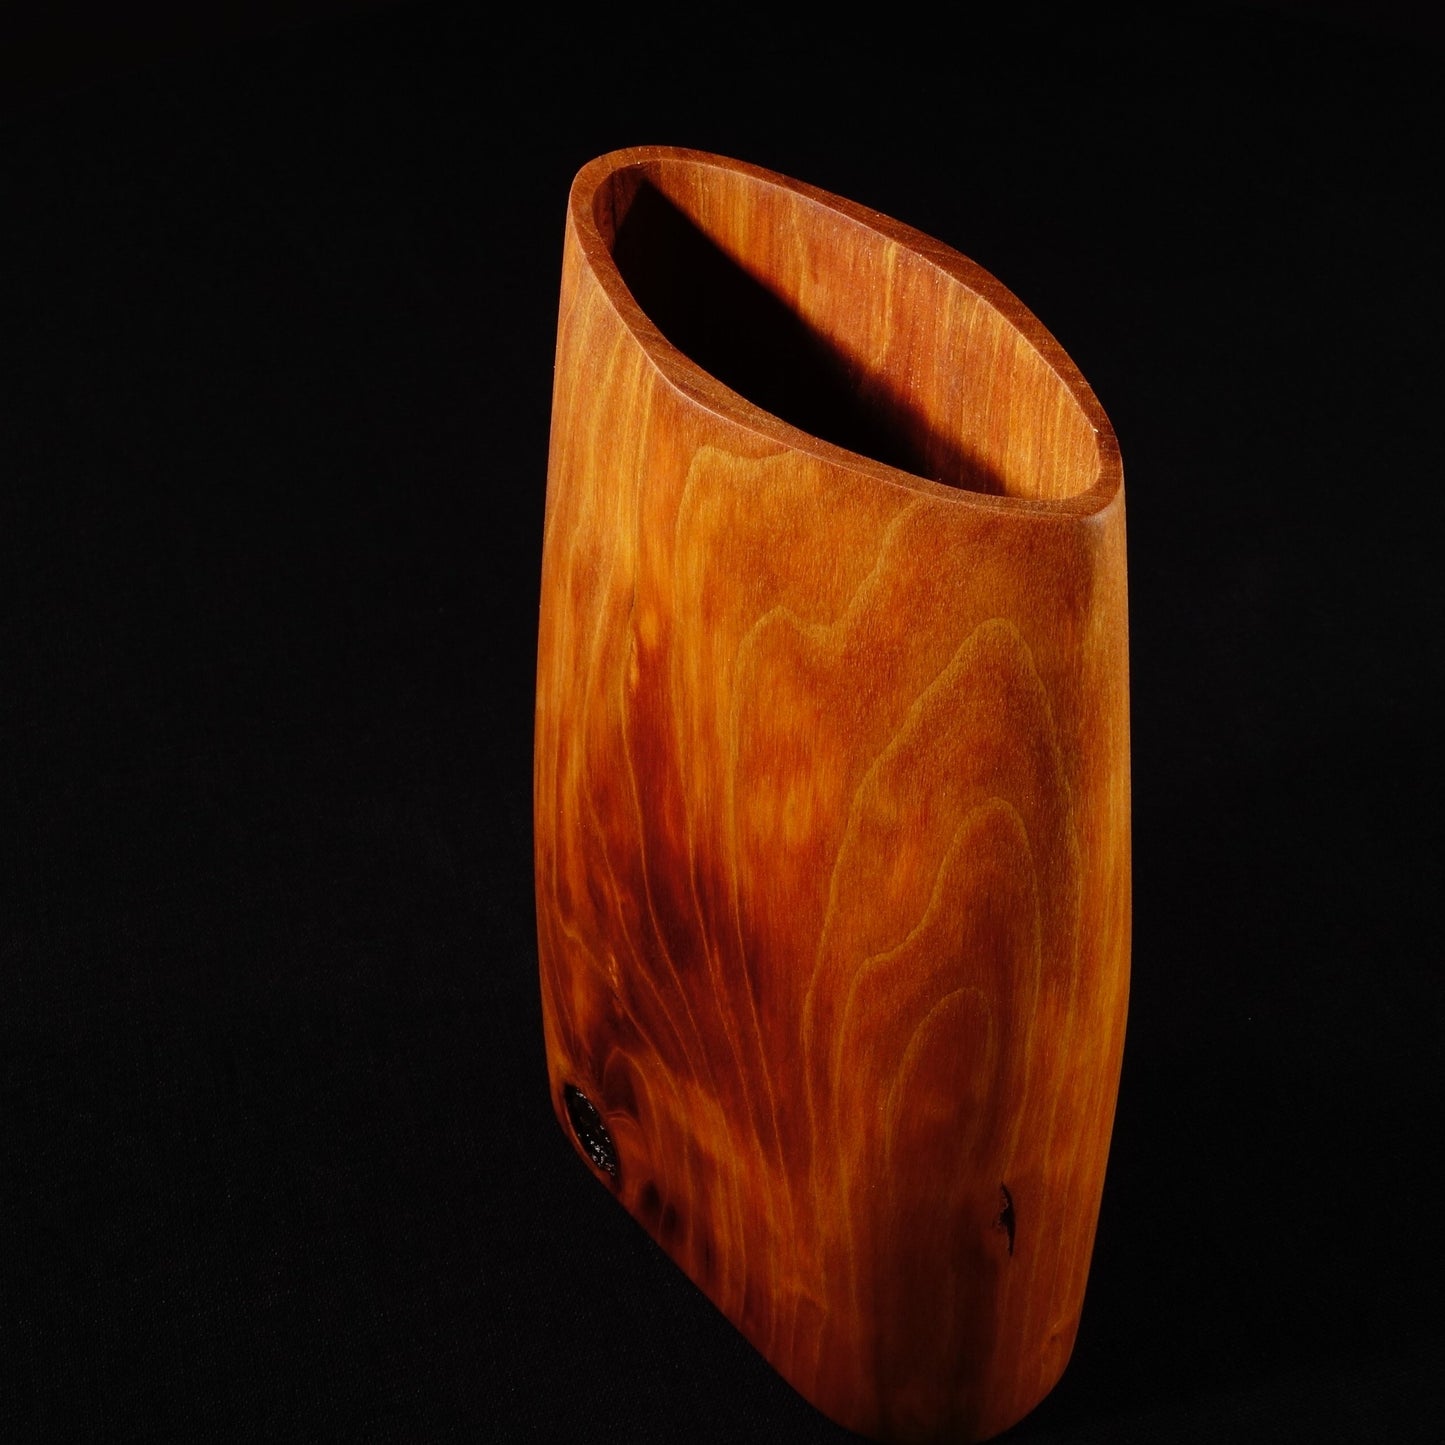 Wood Flower Vase From Above